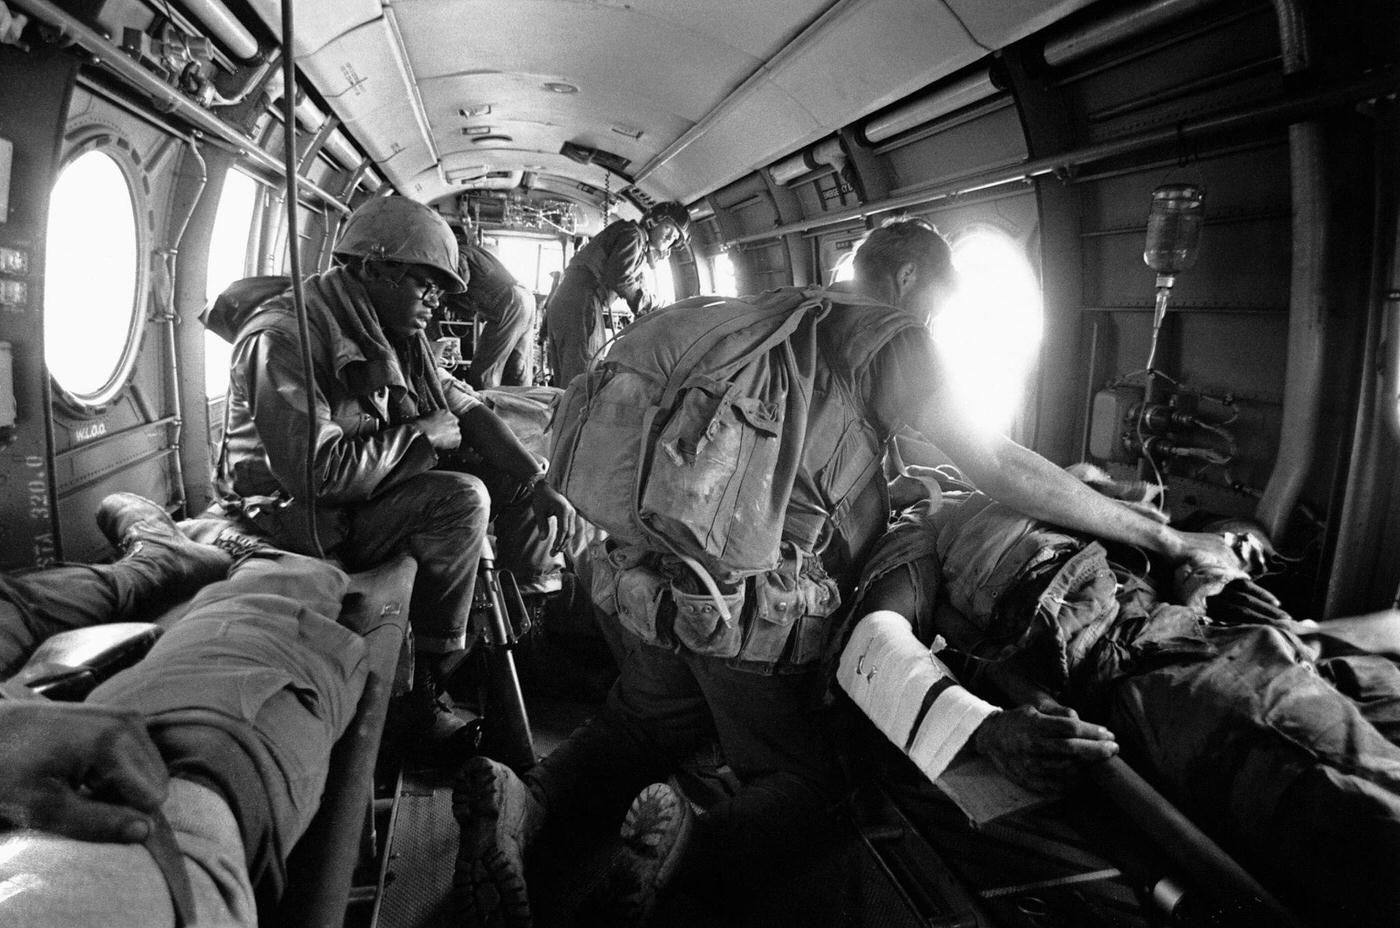 A US soldier wounded during the Vietnam War receiving an emergency blood transfusion on board a medical helicopter.